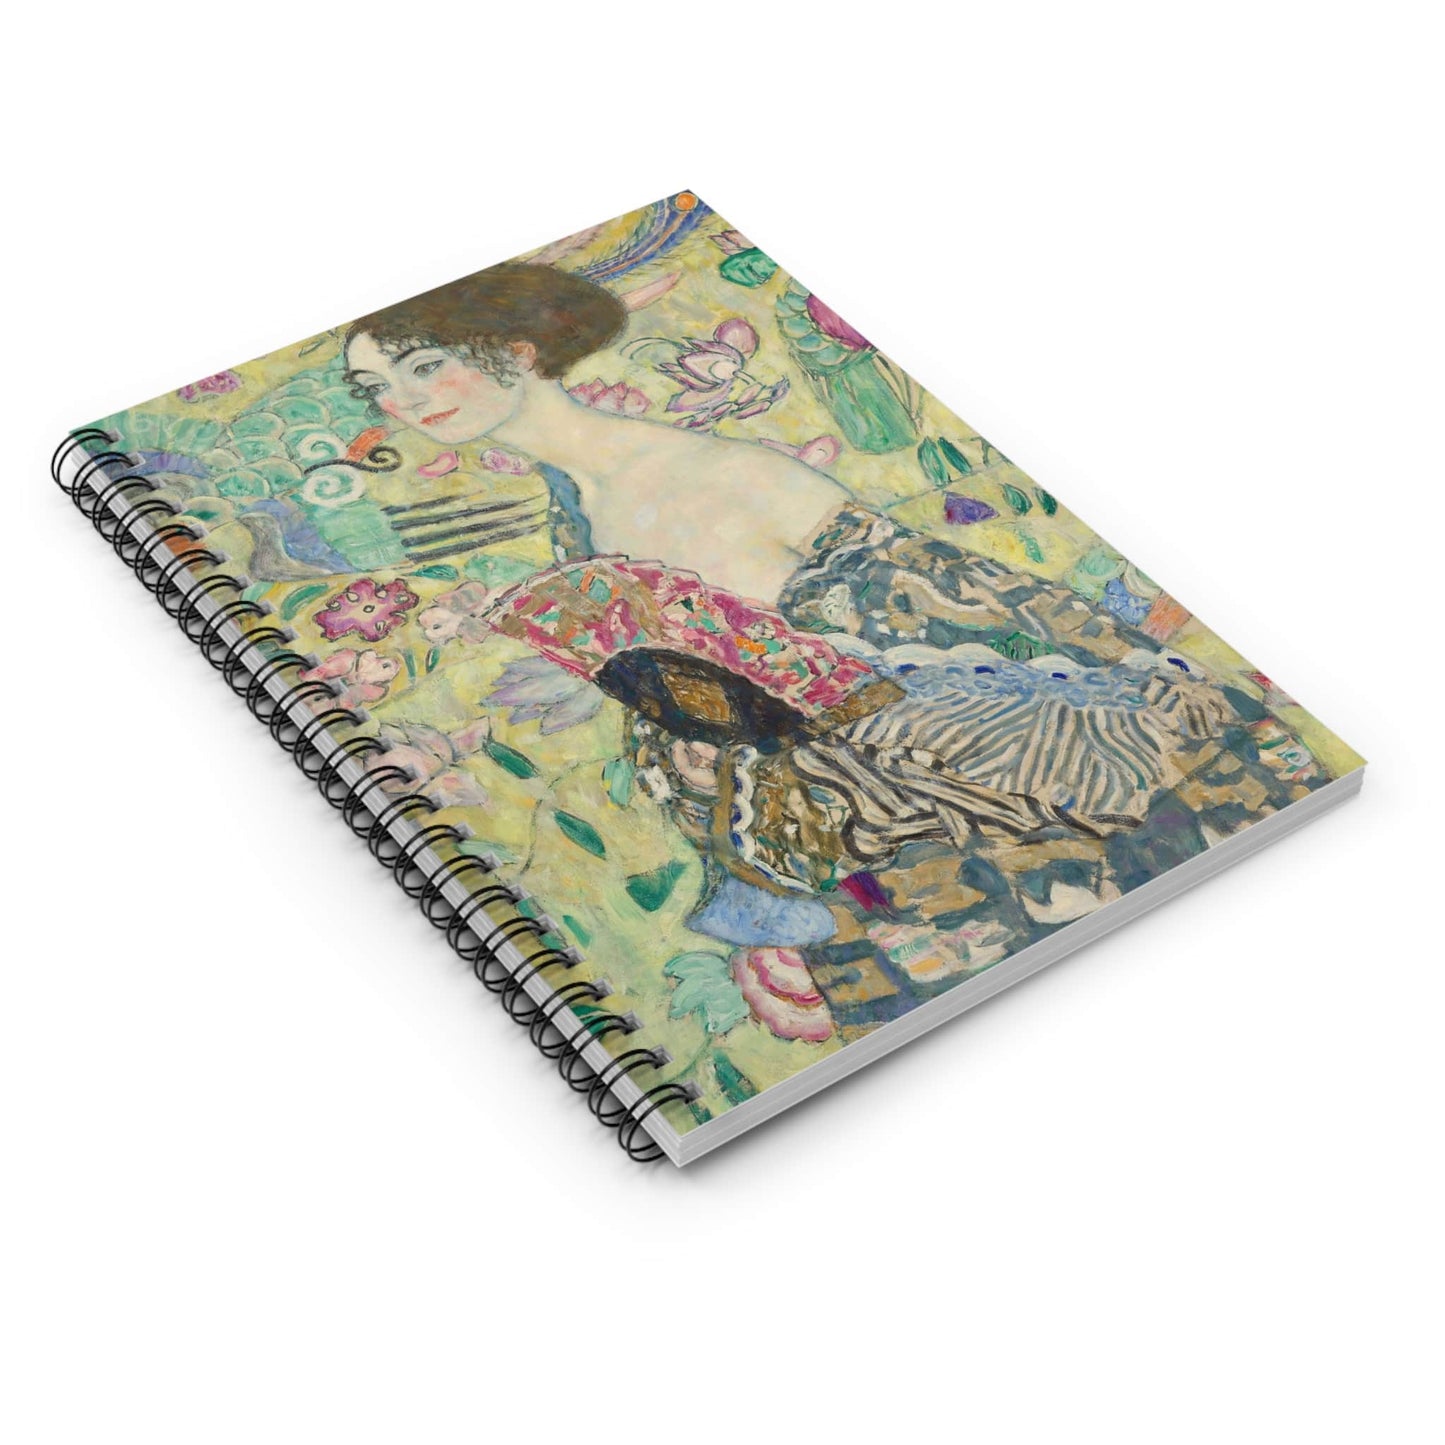 Whimsical Spiral Notebook Laying Flat on White Surface